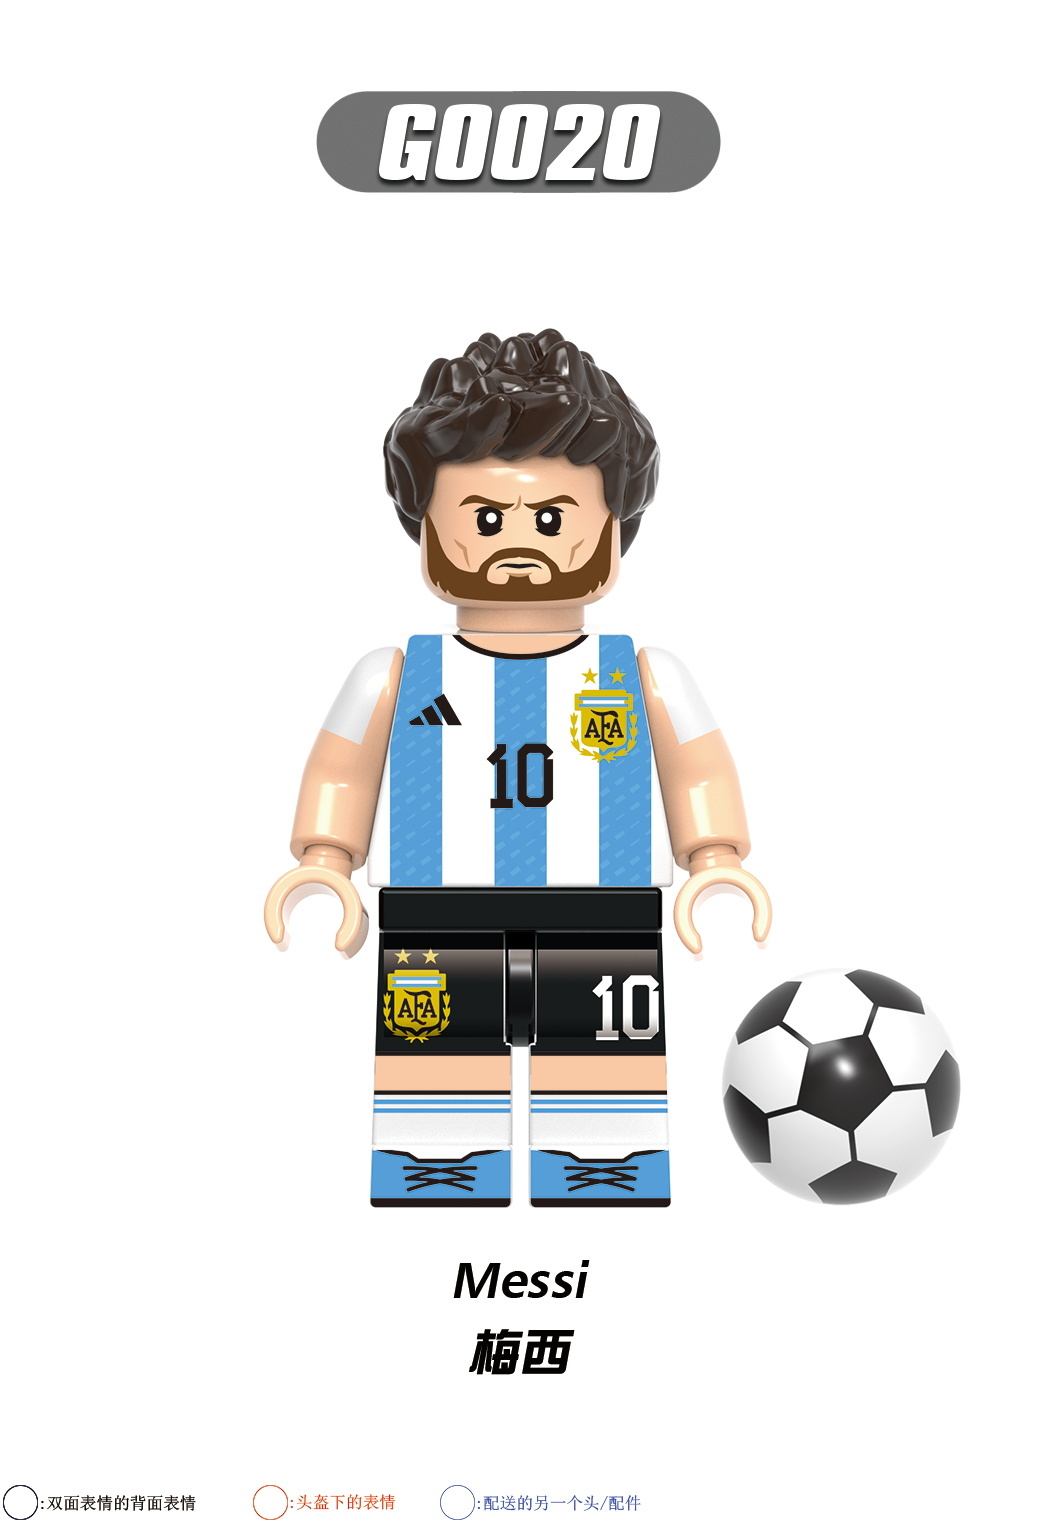 G0103 G0017 G0018 G0019 G0020 G0021 G0022 G0023 G0024 World Cup Football Players Building Blocks Ronaldo Benzema Bale Messi Kroos De Bruyne  Action Figures Educational Toys For Kids Gifts